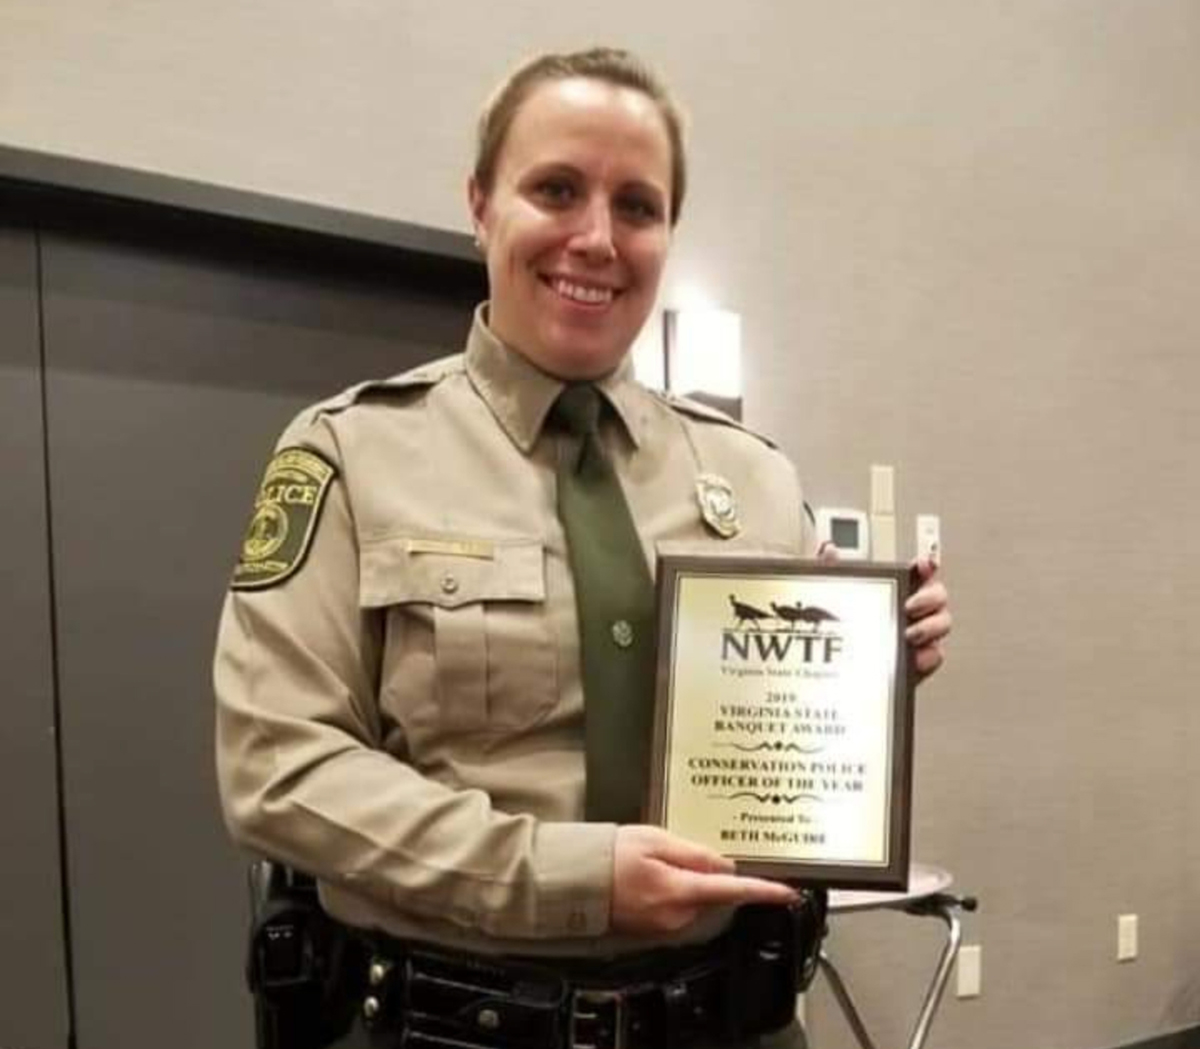 Senior CPO Beth McGuire holding a award she has won for her service